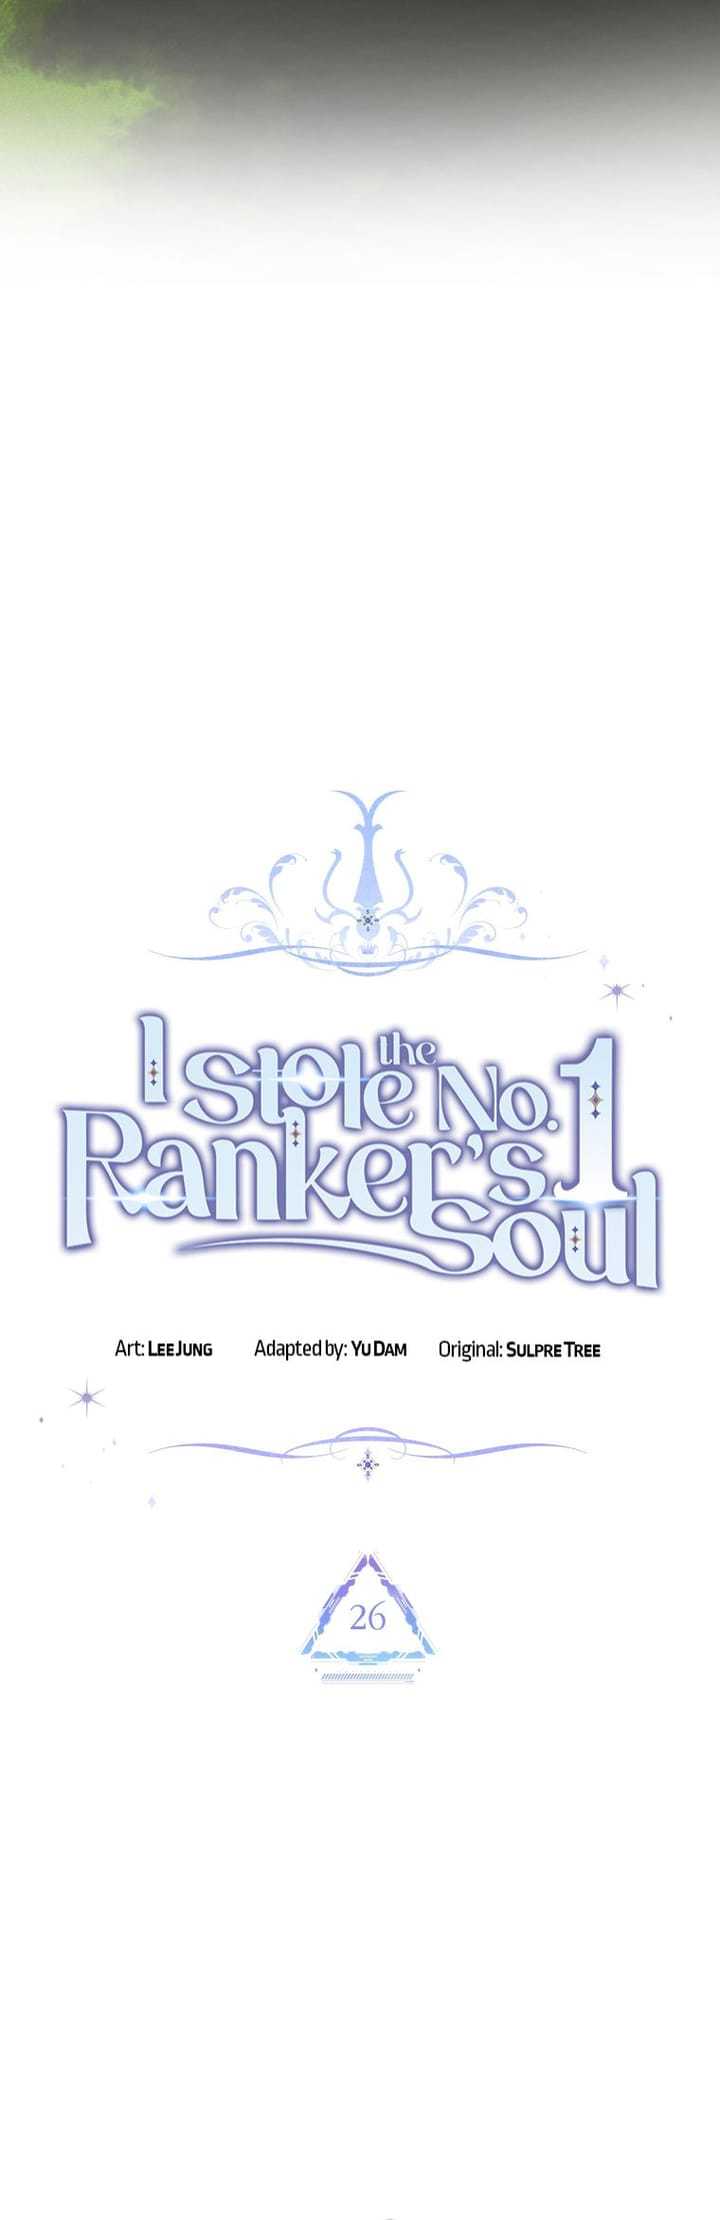 I Stole the Number One Ranker’s Soul Chapter 26